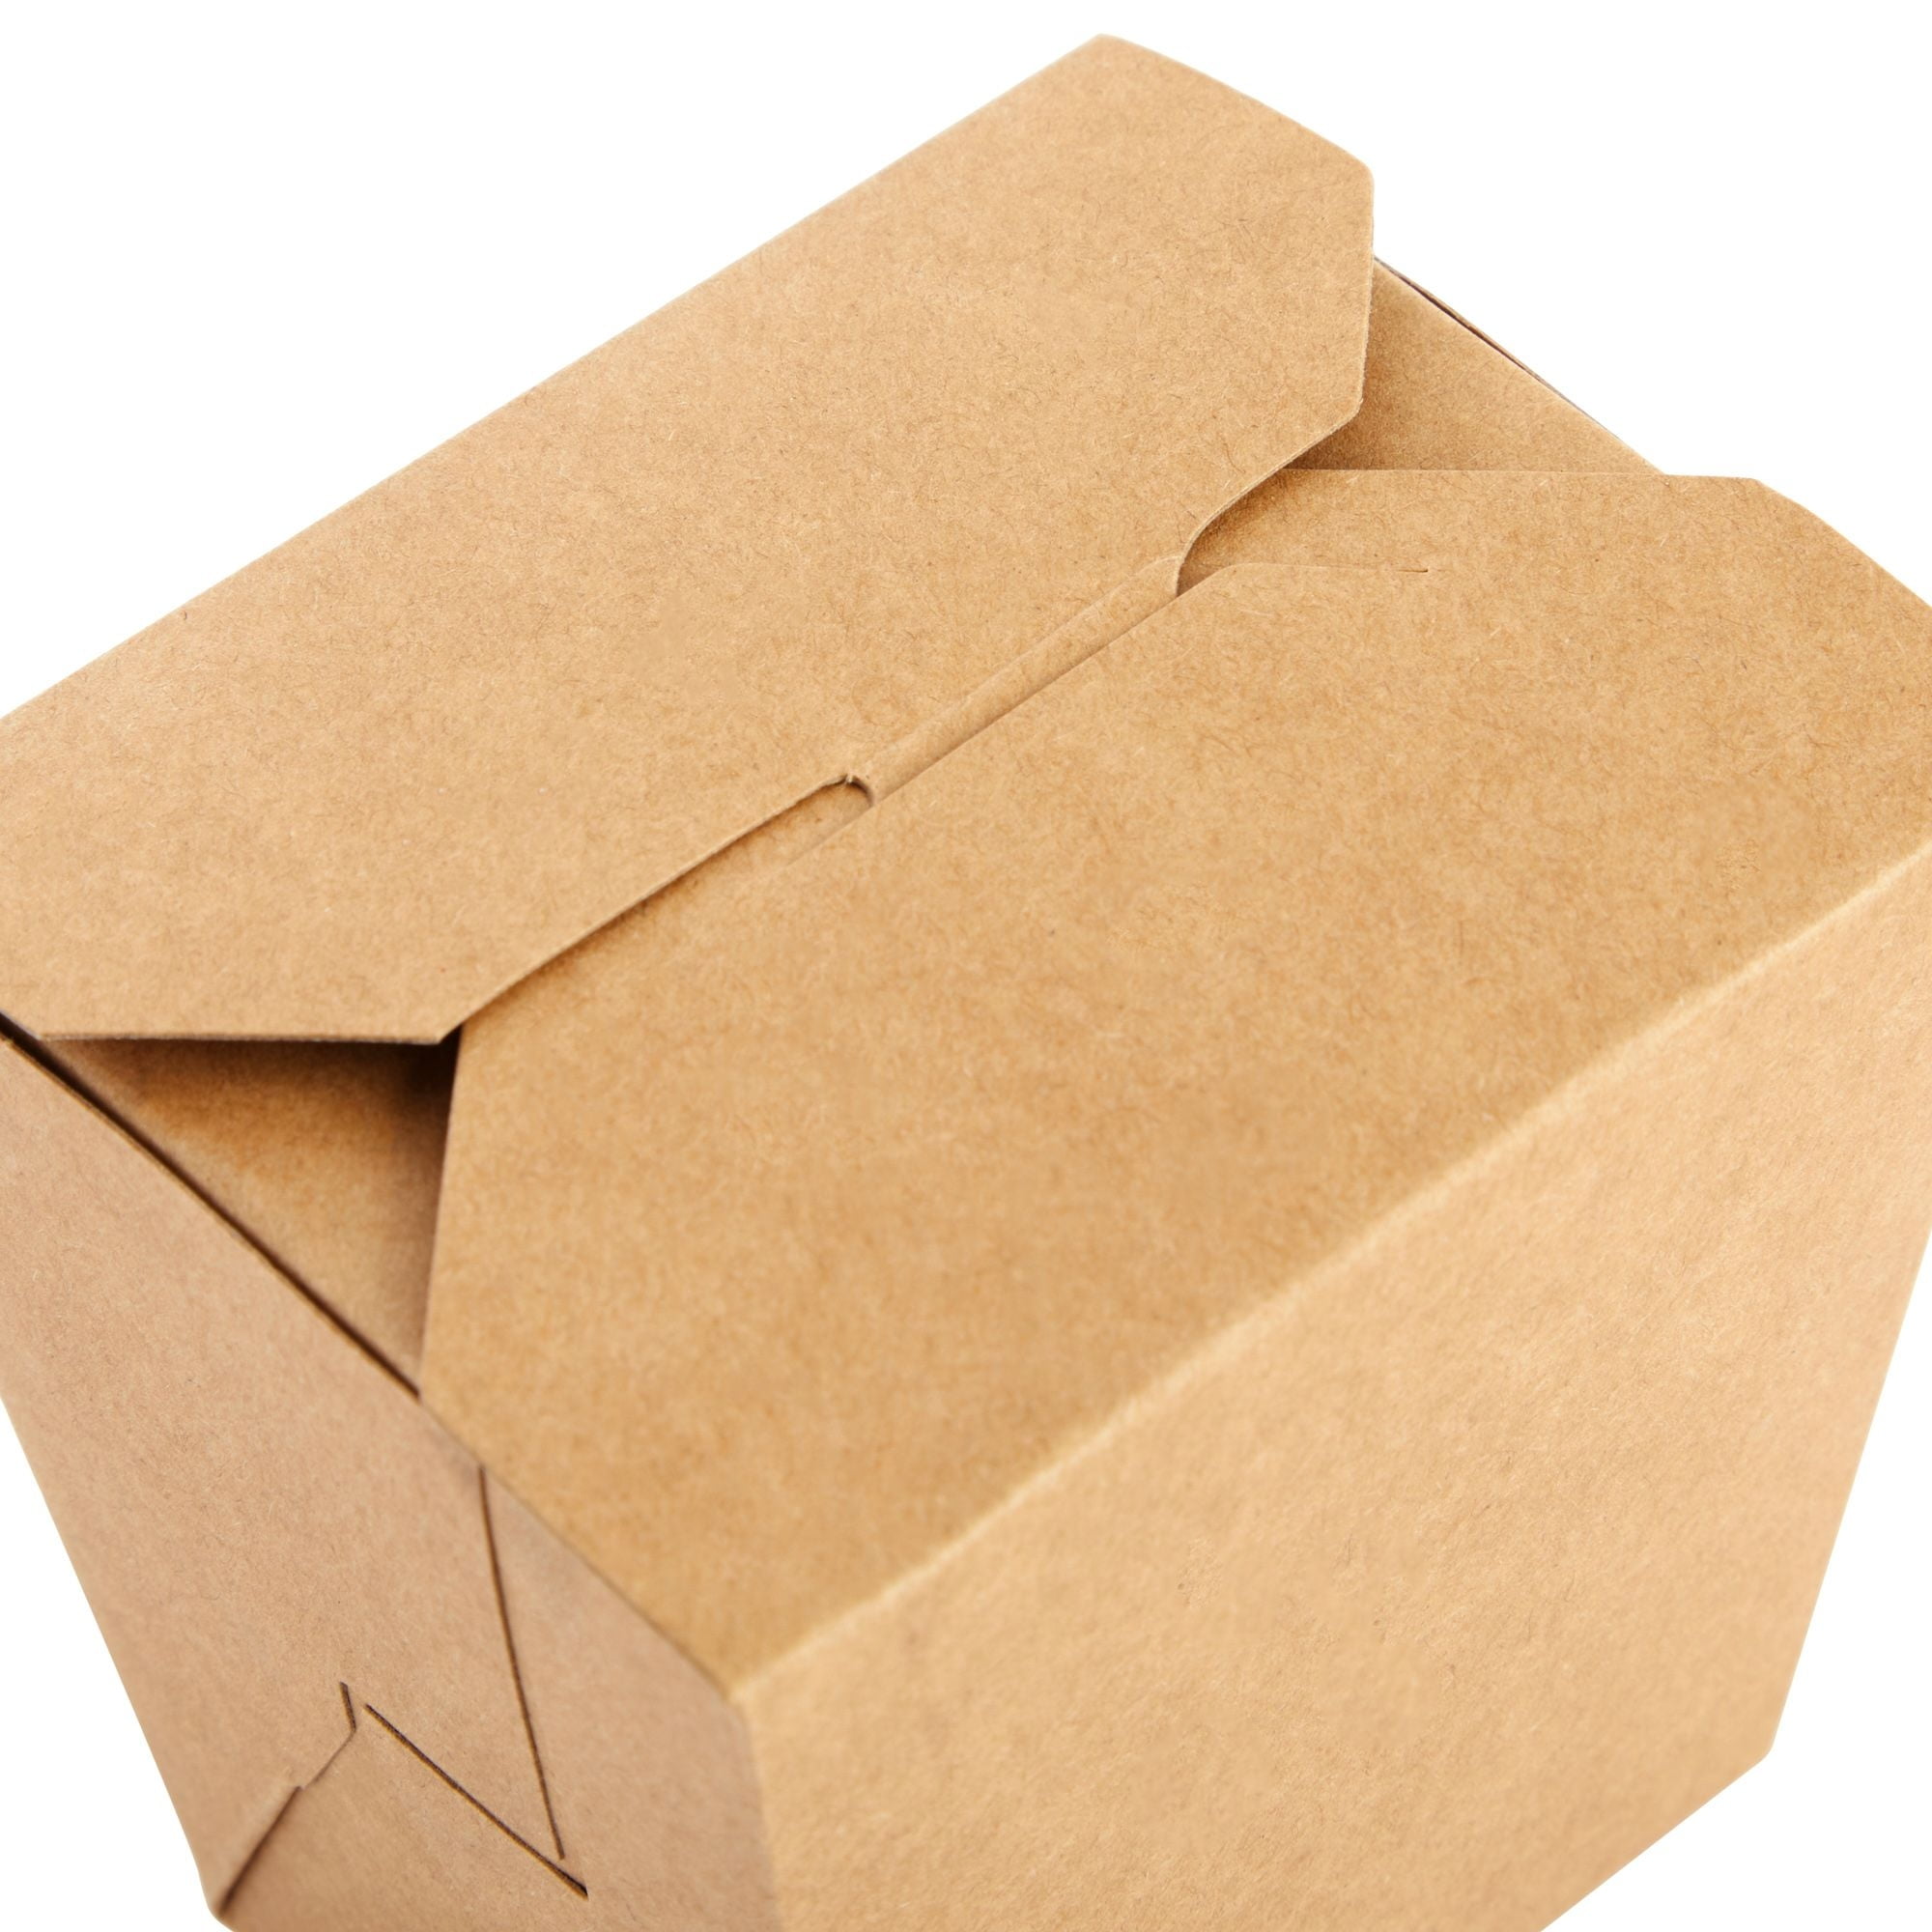 PINGEUI 60 Pack Kraft Food Containers, 30 oz Kraft Paper Brown Take Out Lunch Meal Food Packaging Boxes Leak and Grease Resistant to Go Containers